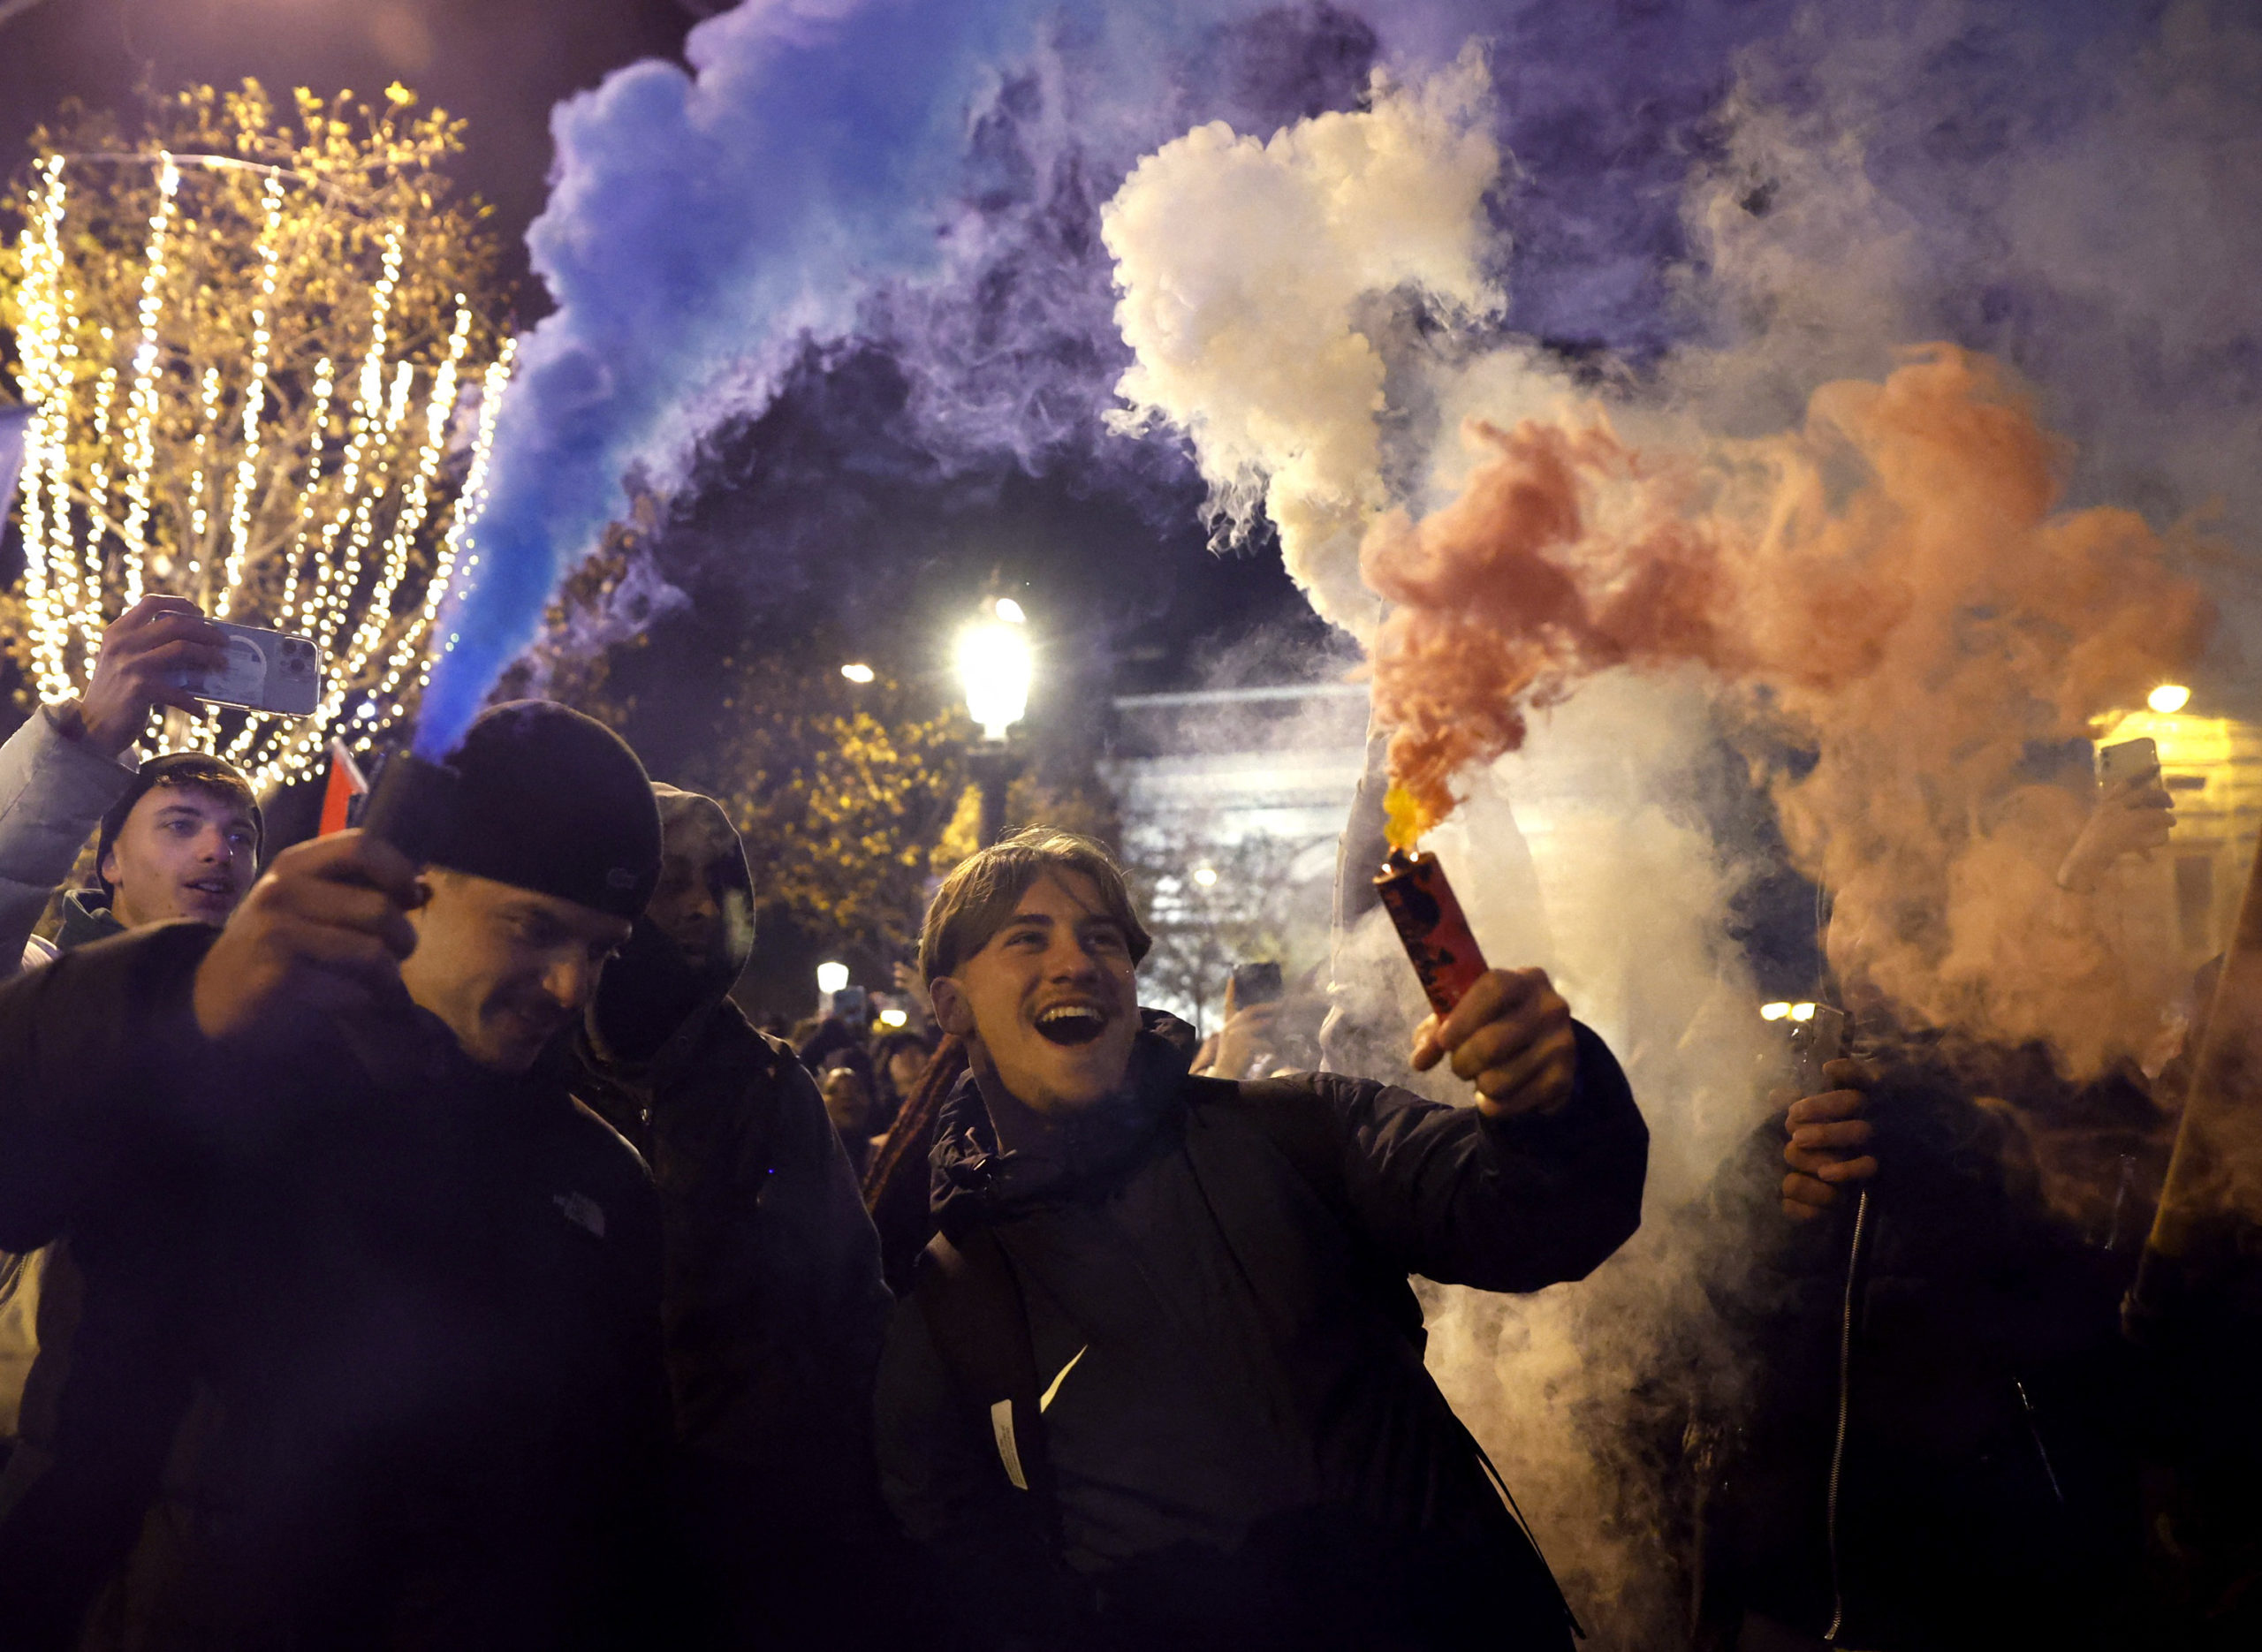 Soccer Football - Qatar 2022 FIFA World Cup - Fans gather in Paris to watch France v Morocco - Paris, France - December 14, 2022 French fans celebrate with flares on the avenue Champs-Elysees after the match as France advances to the final